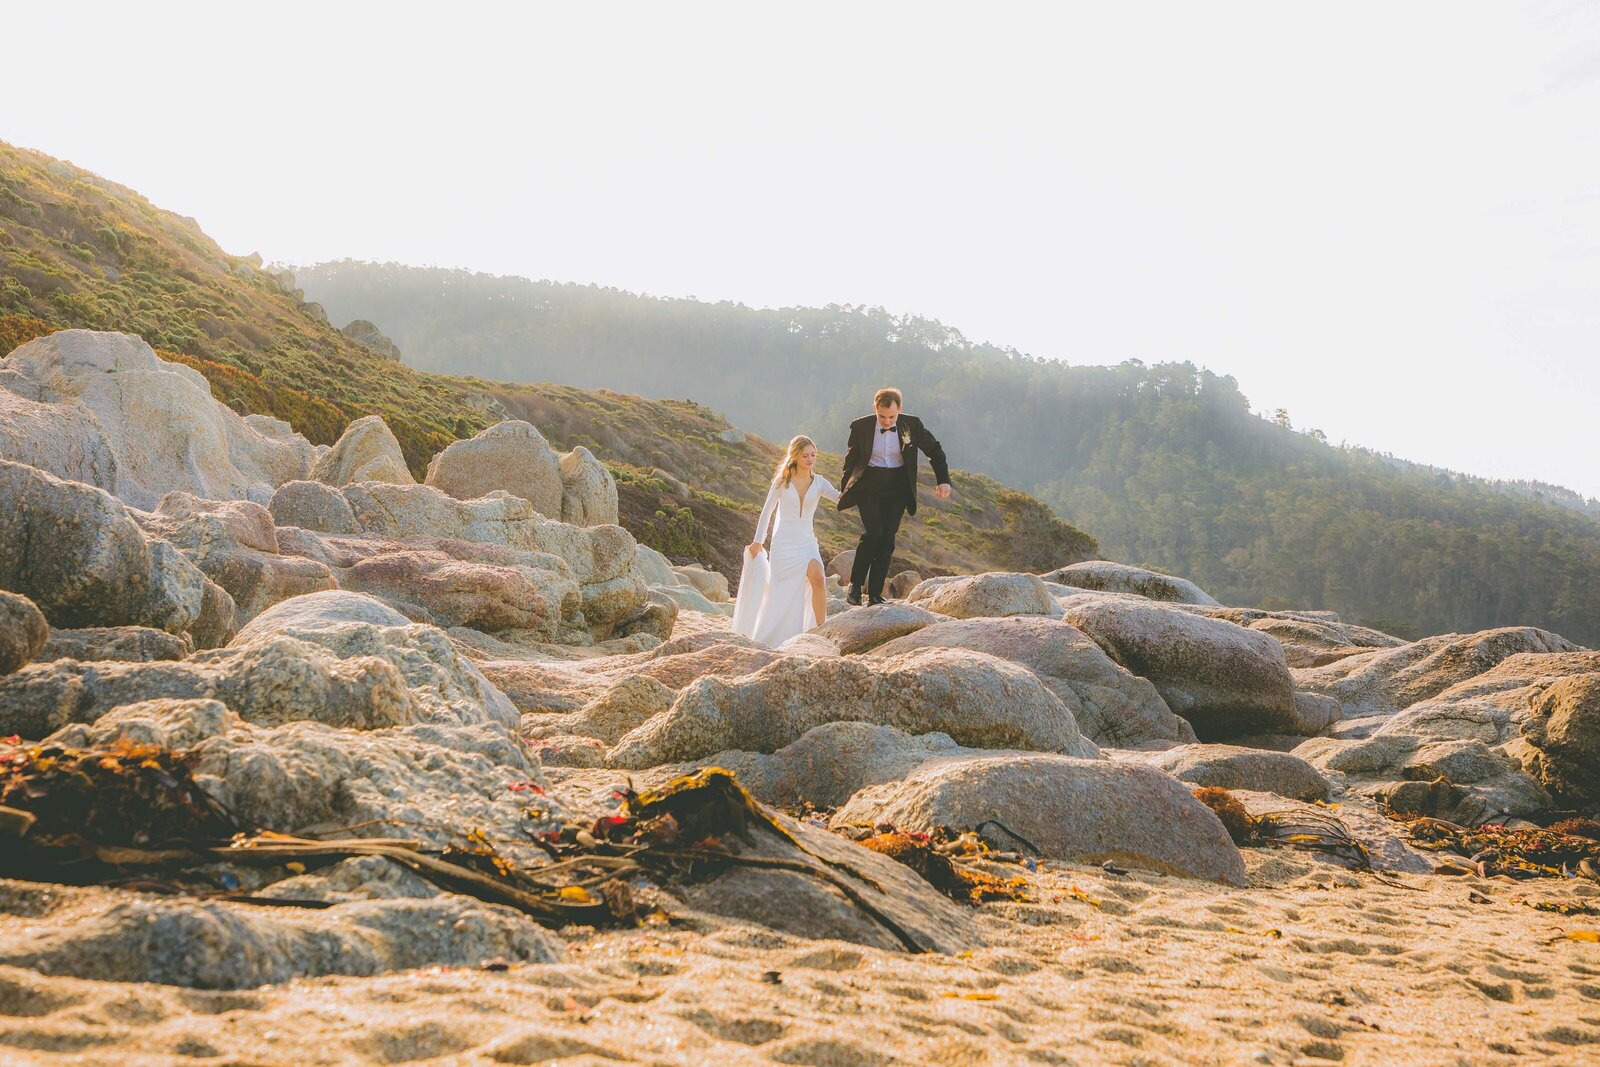 A bride and groom go on an adventure over large rocks during their beach elopement.